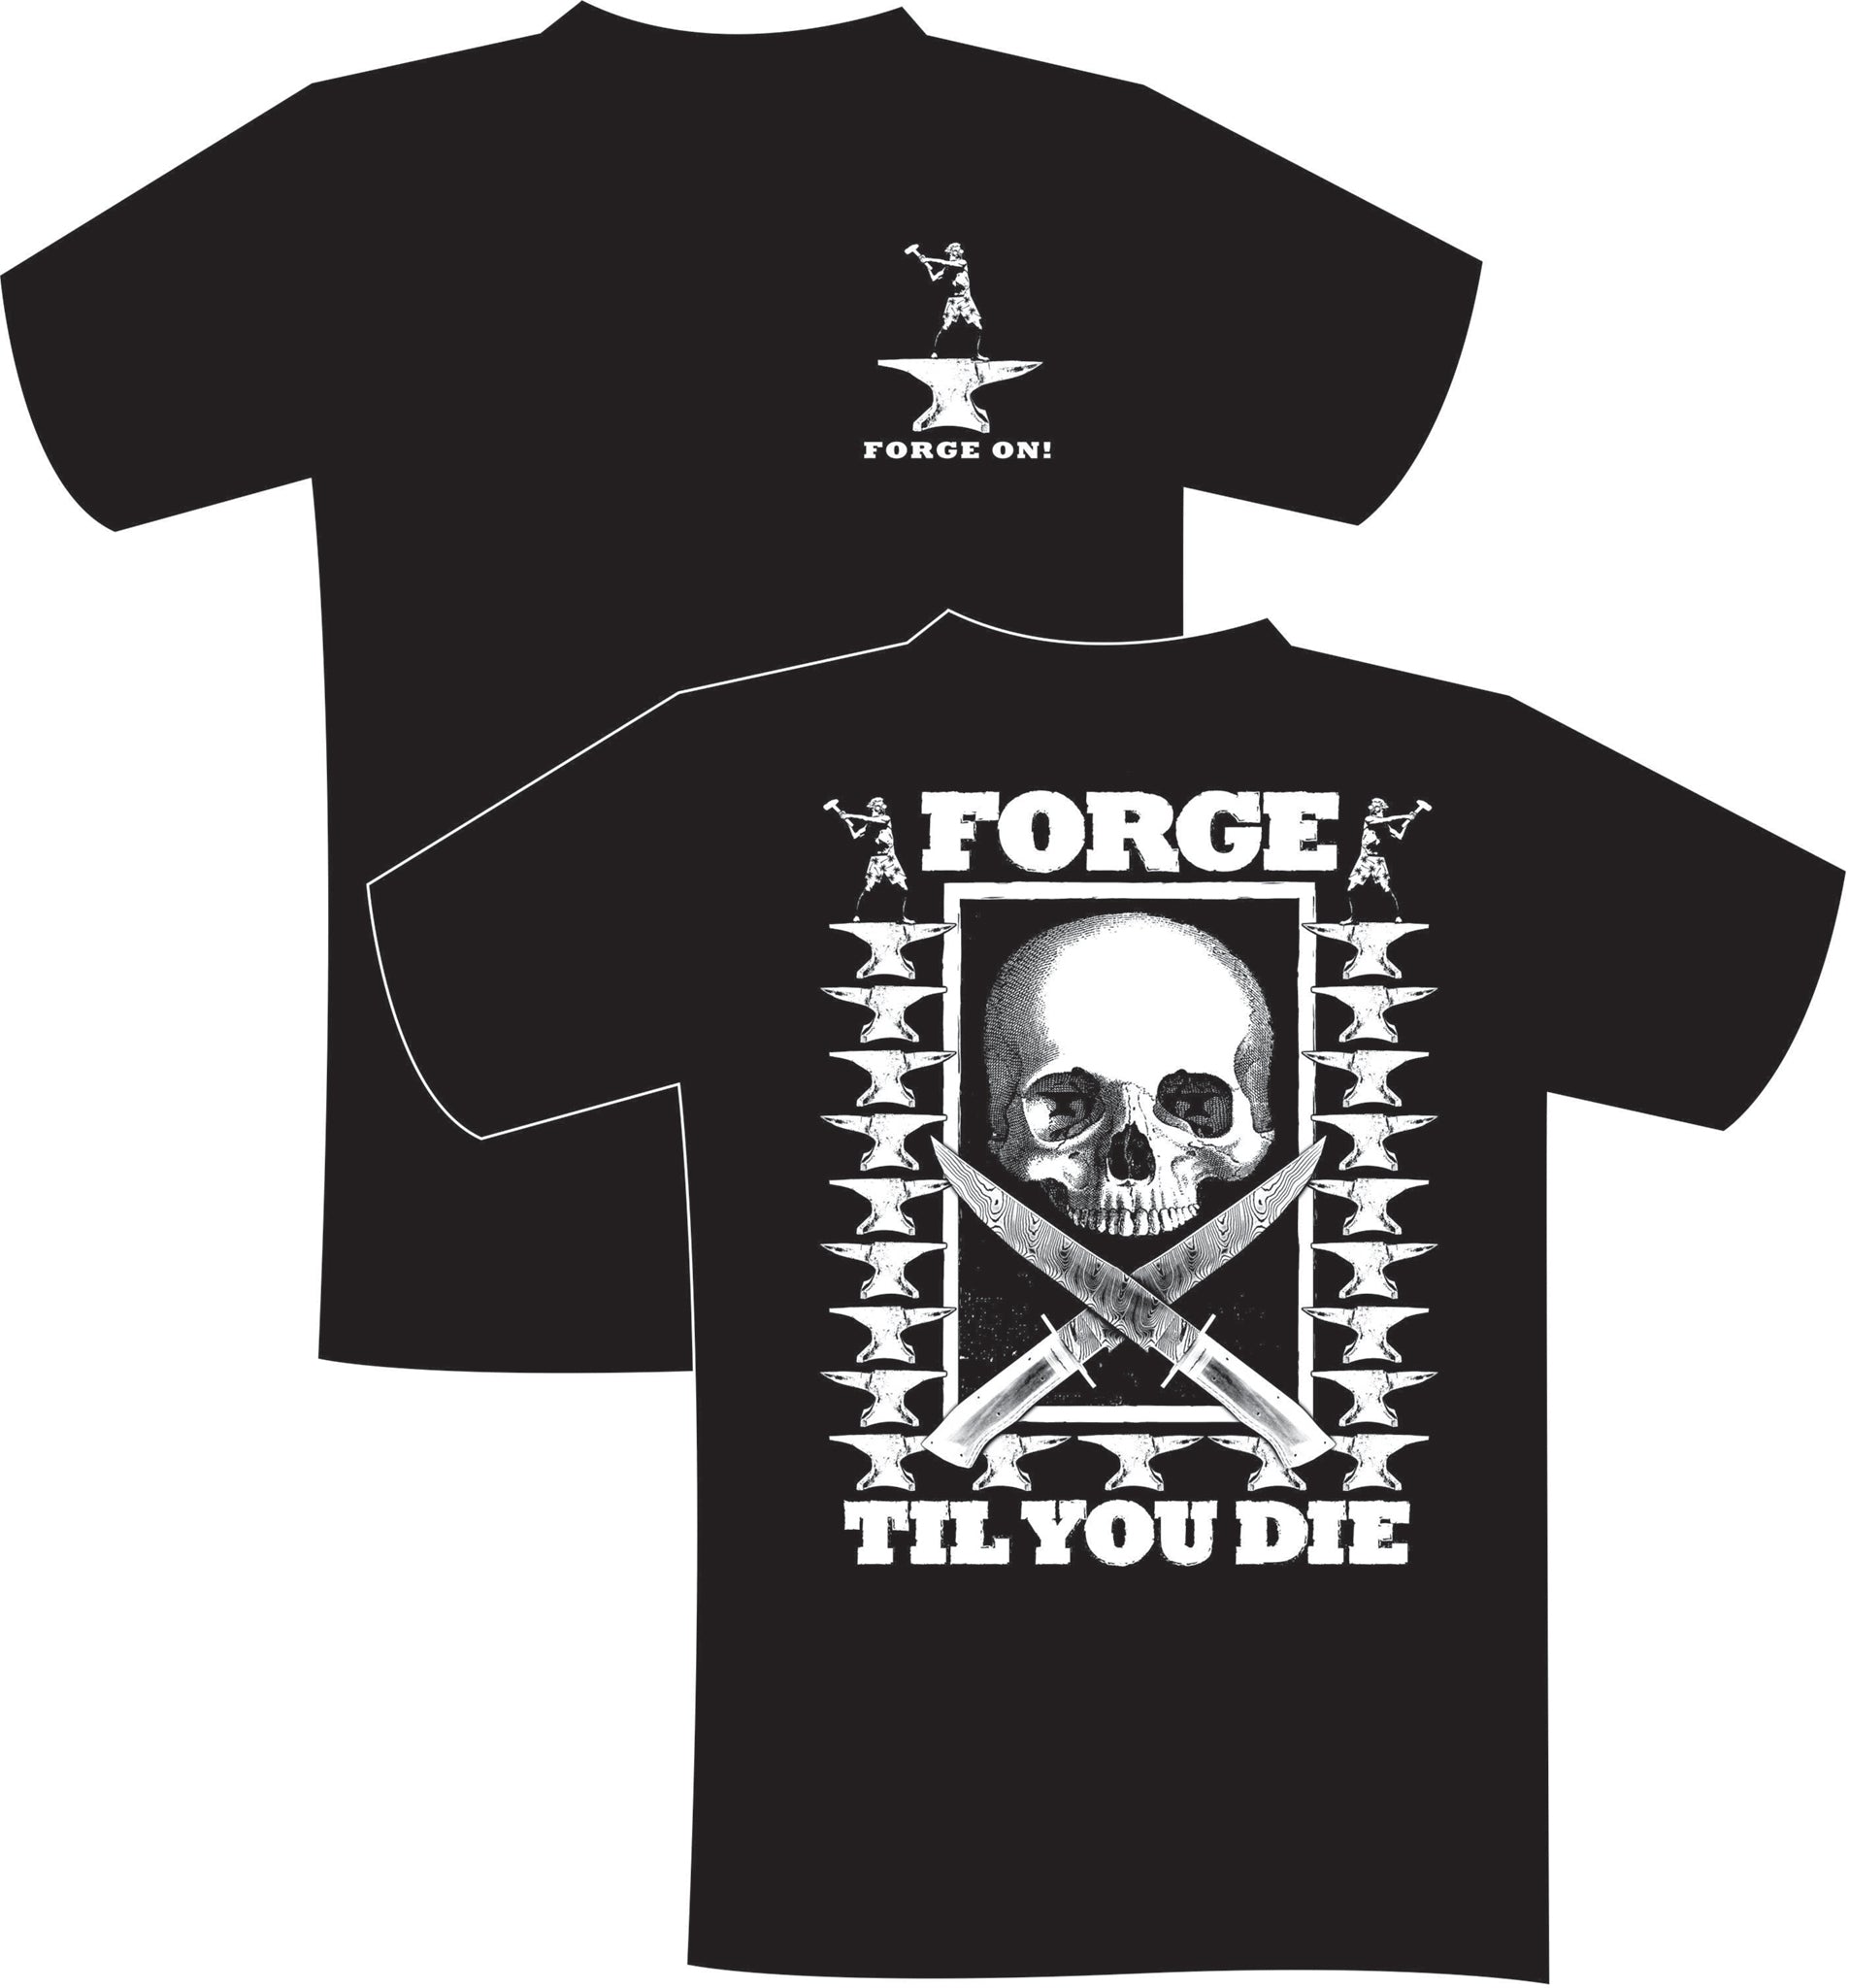 Forge On! T-shirt